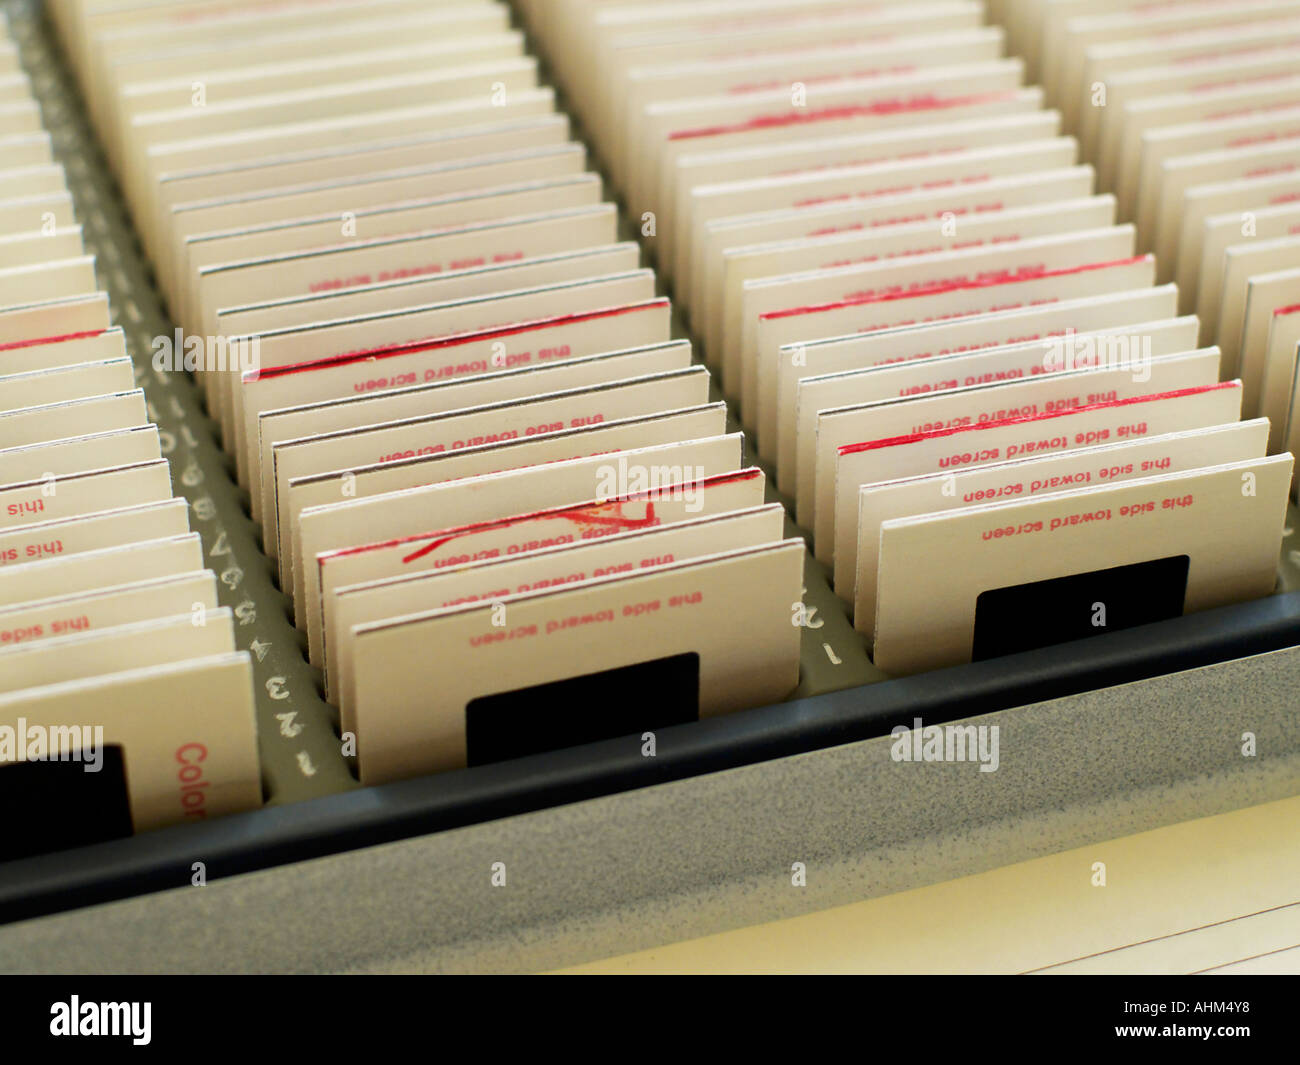 Rows and rows of photographic slides in a slide organizing tray, in shallow focus Stock Photo